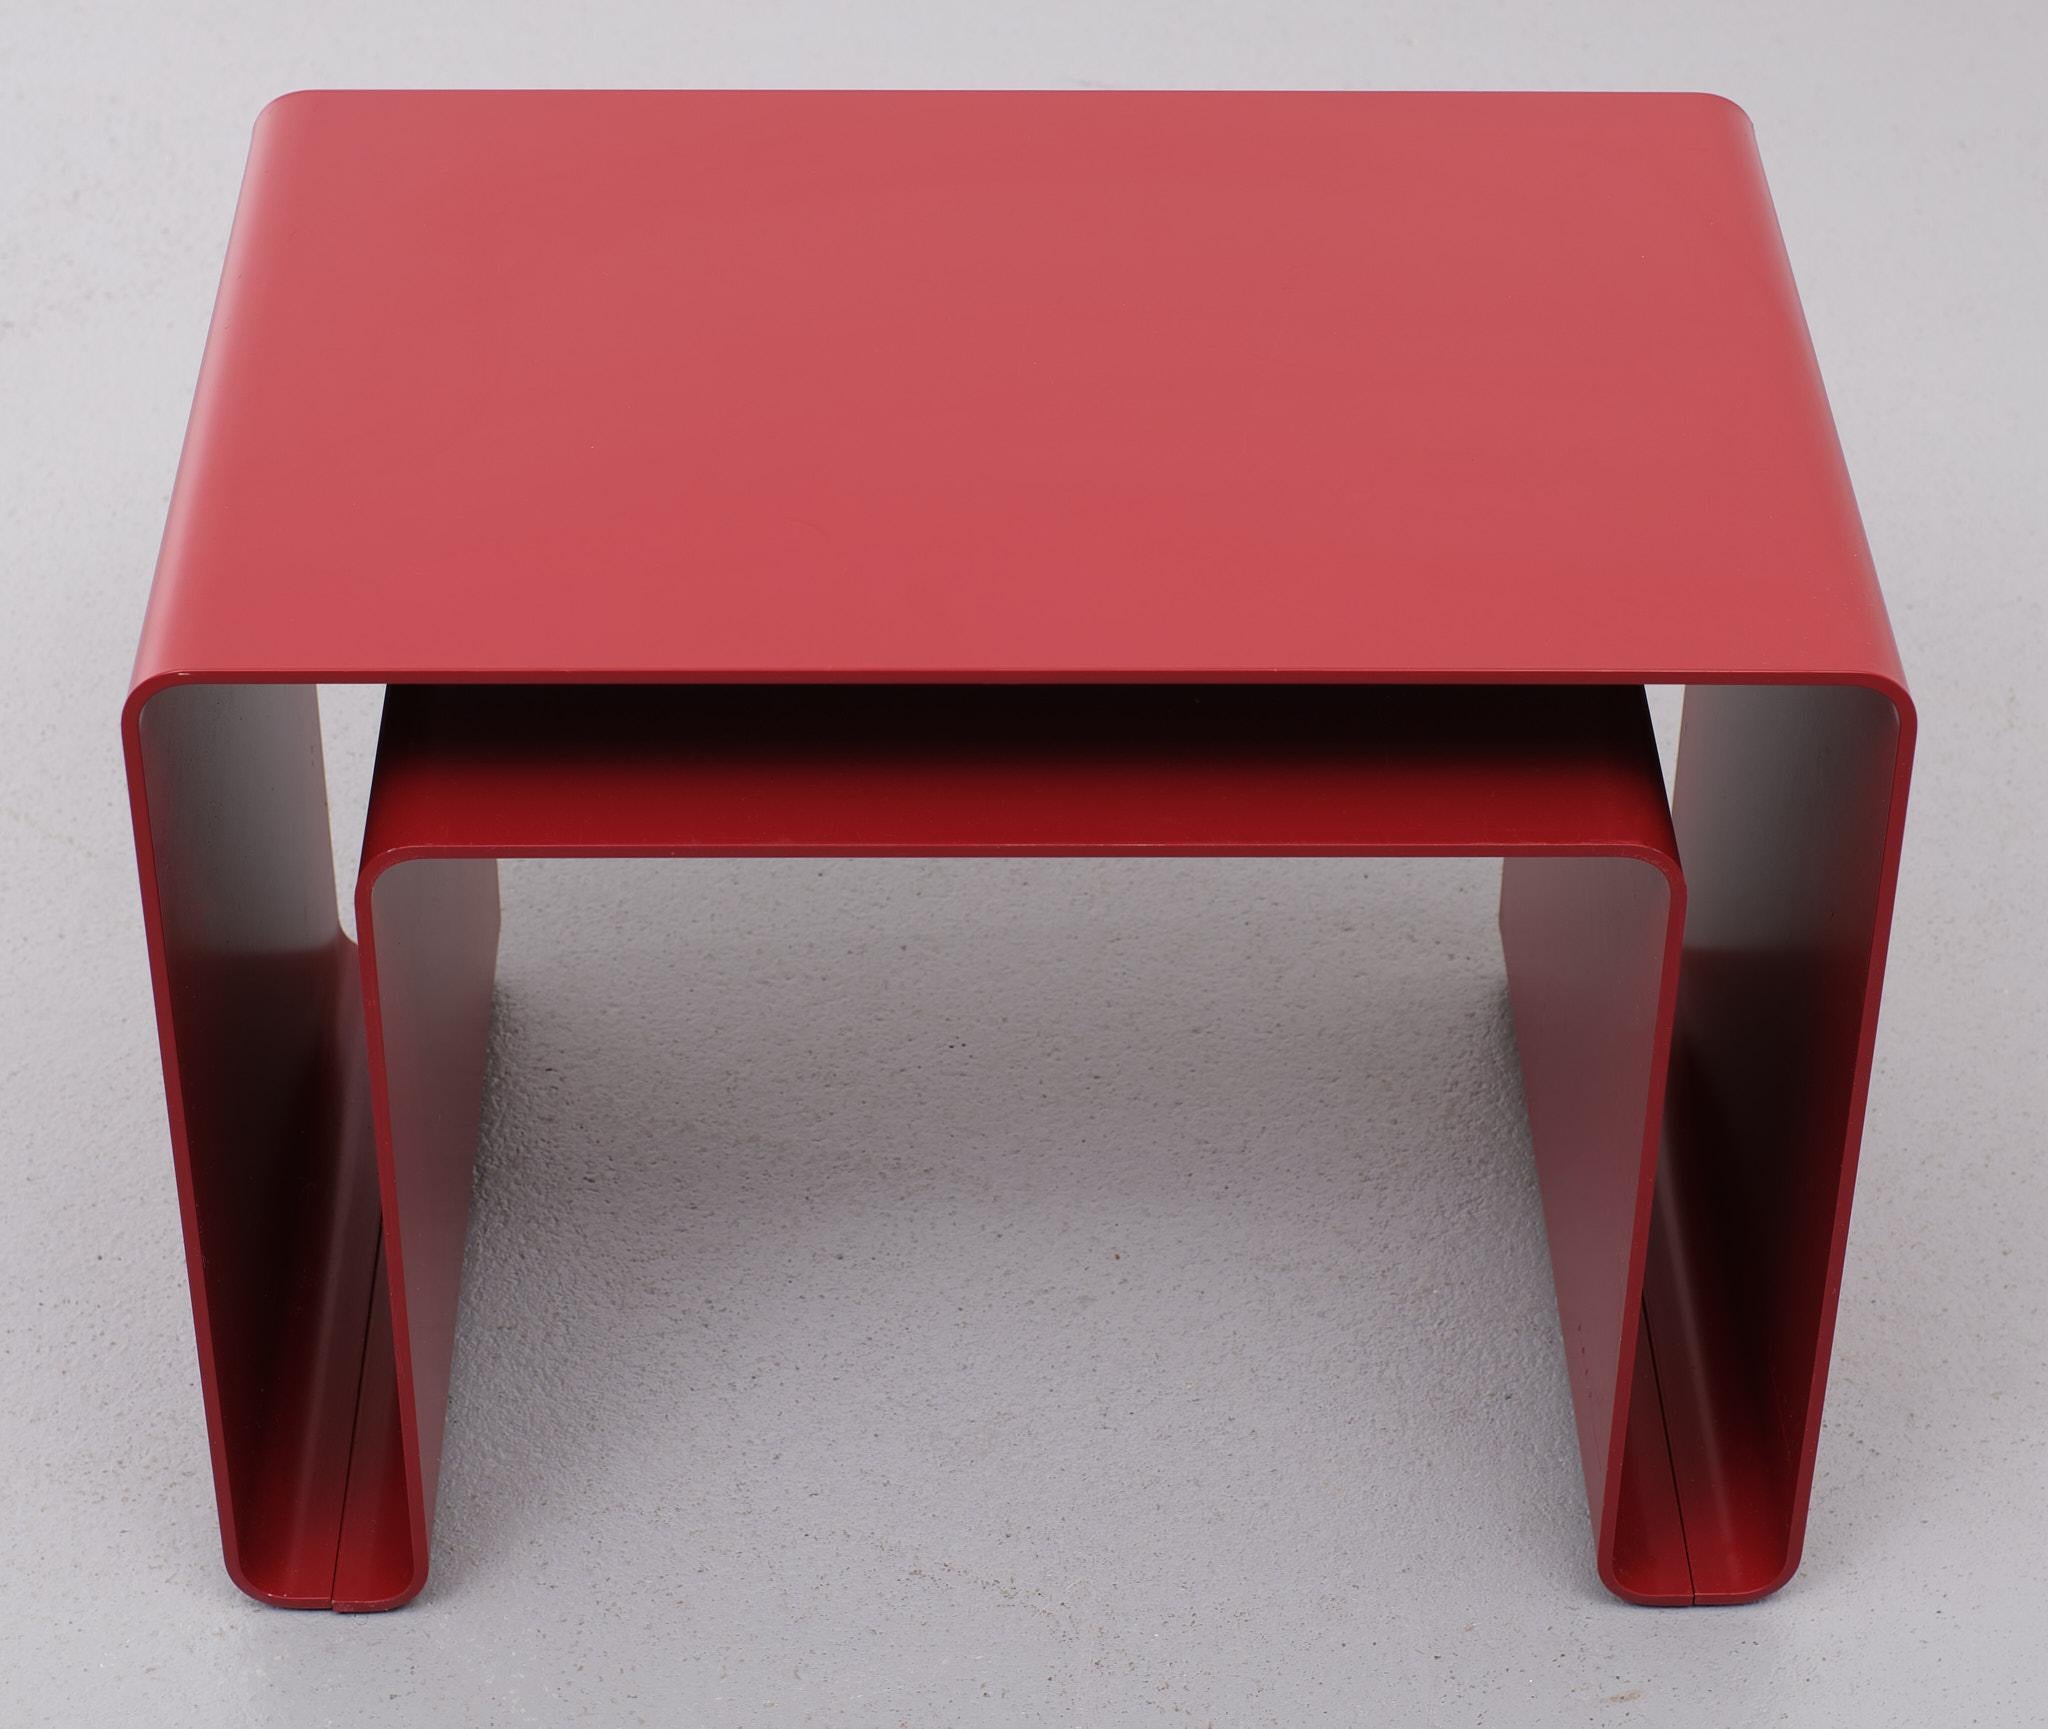 This rare set of 2 nesting tables is called the modular 'Low Table Program 010'. It was designed by Dieter Rams and Thomas Merkel for SDR+. It consists of one high and one lower table which can be telescoped. The low table program 010 was made in